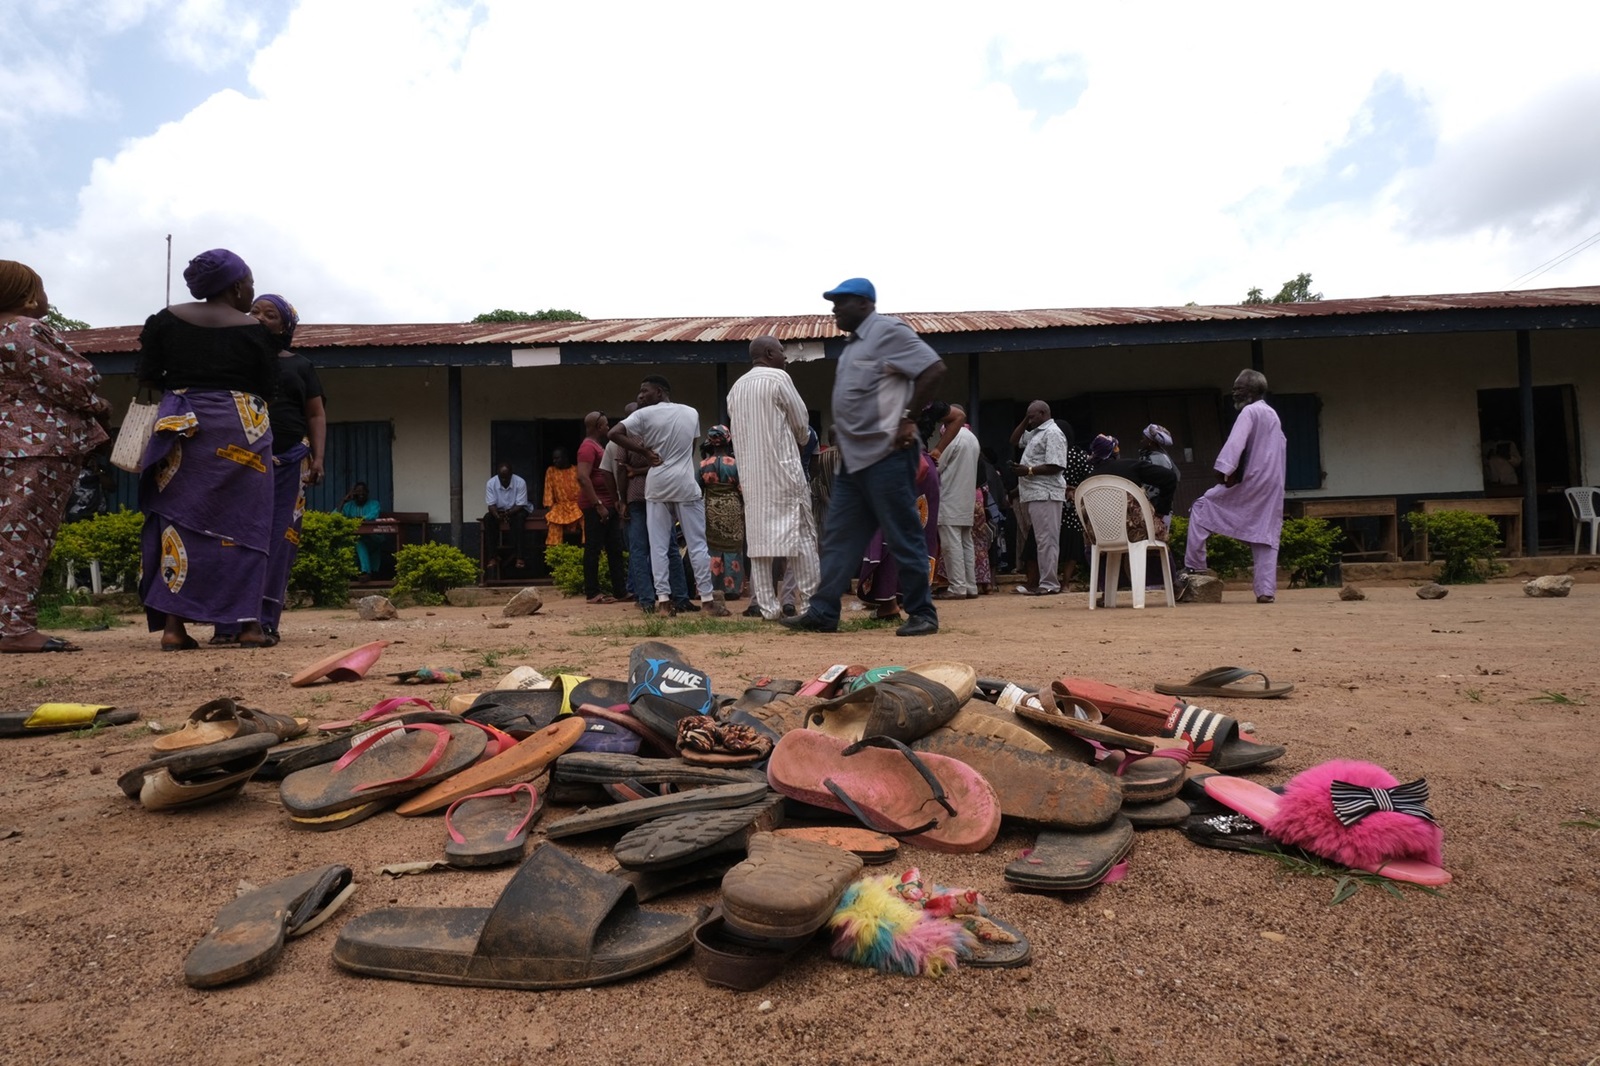 The remaining wares of students of Bethel Baptist High School are seen inside the school premises as parent of abducted students wait for the return of their children whom were abducted by gunmen in the Chikun Local Government Area of Kaduna state, northwest Nigeria on July 14, 2021. The girls are just two of the more than 100 Nigerian children snatched from Bethel Baptist High School nearly three weeks ago, herded by gunmen into the forests after a kidnapping raid on their dormitories.
The July 5 attack in Nigeria's northwest Kaduna state was just the latest mass abduction at a school or college as kidnap gangs seeking quick ransoms zero in on soft target of young students.
Armed kidnappings for ransom along highways, and from homes and businesses now make almost daily newspaper headlines in Africa's most populous country.,Image: 621836376, License: Rights-managed, Restrictions: To go with AFP story by Patrick Markey, Model Release: no, Credit line: Kola Sulaimon / AFP / Profimedia